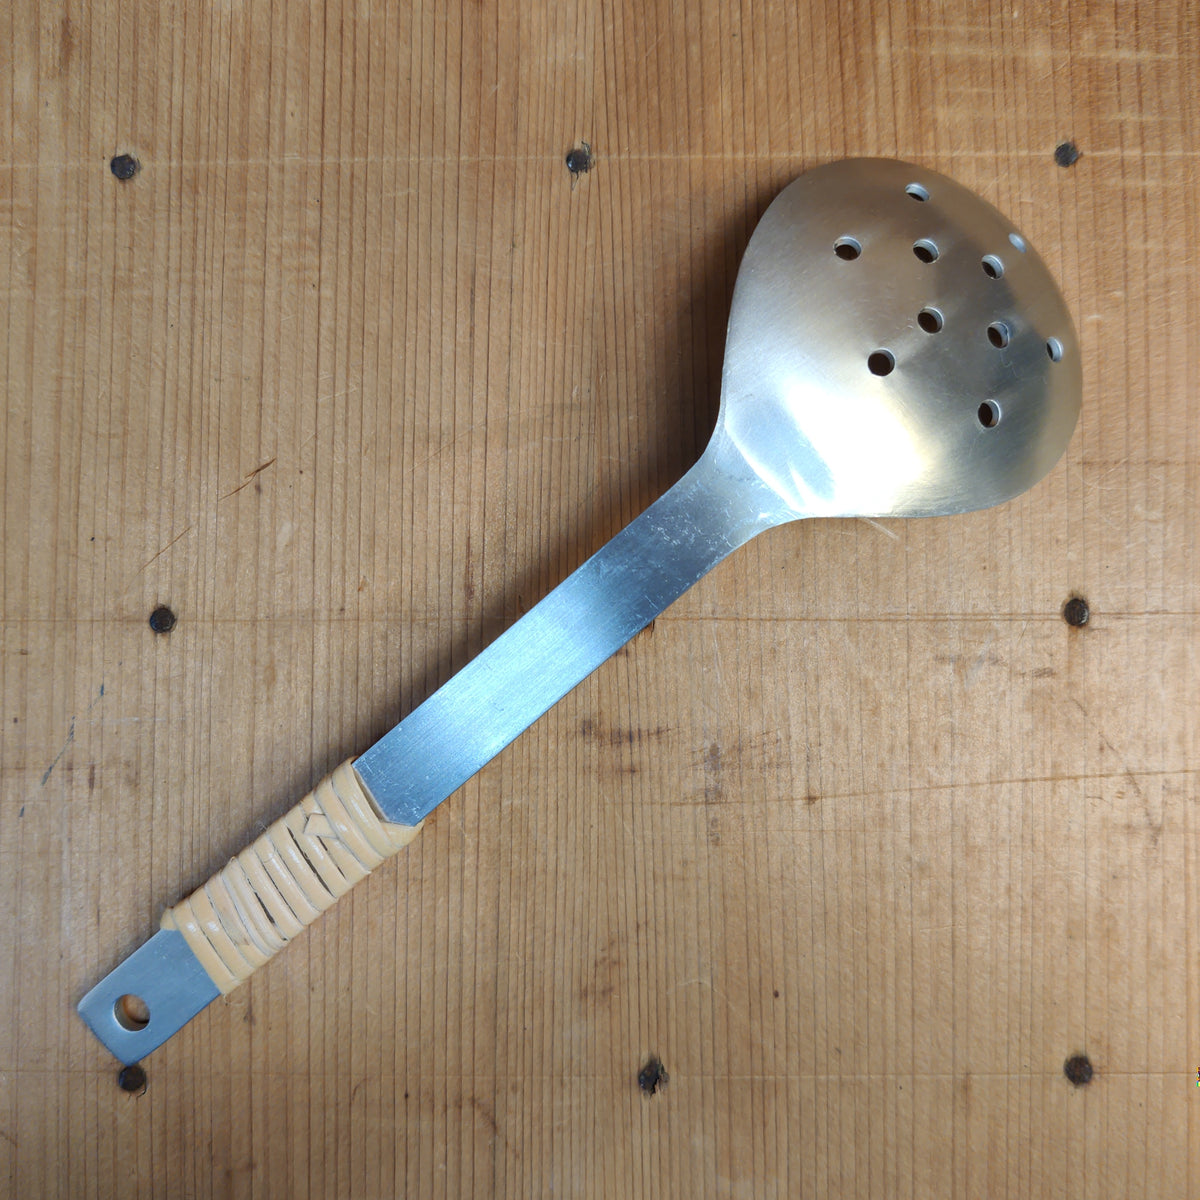 Aluminum Serving Spoon - Round with Holes